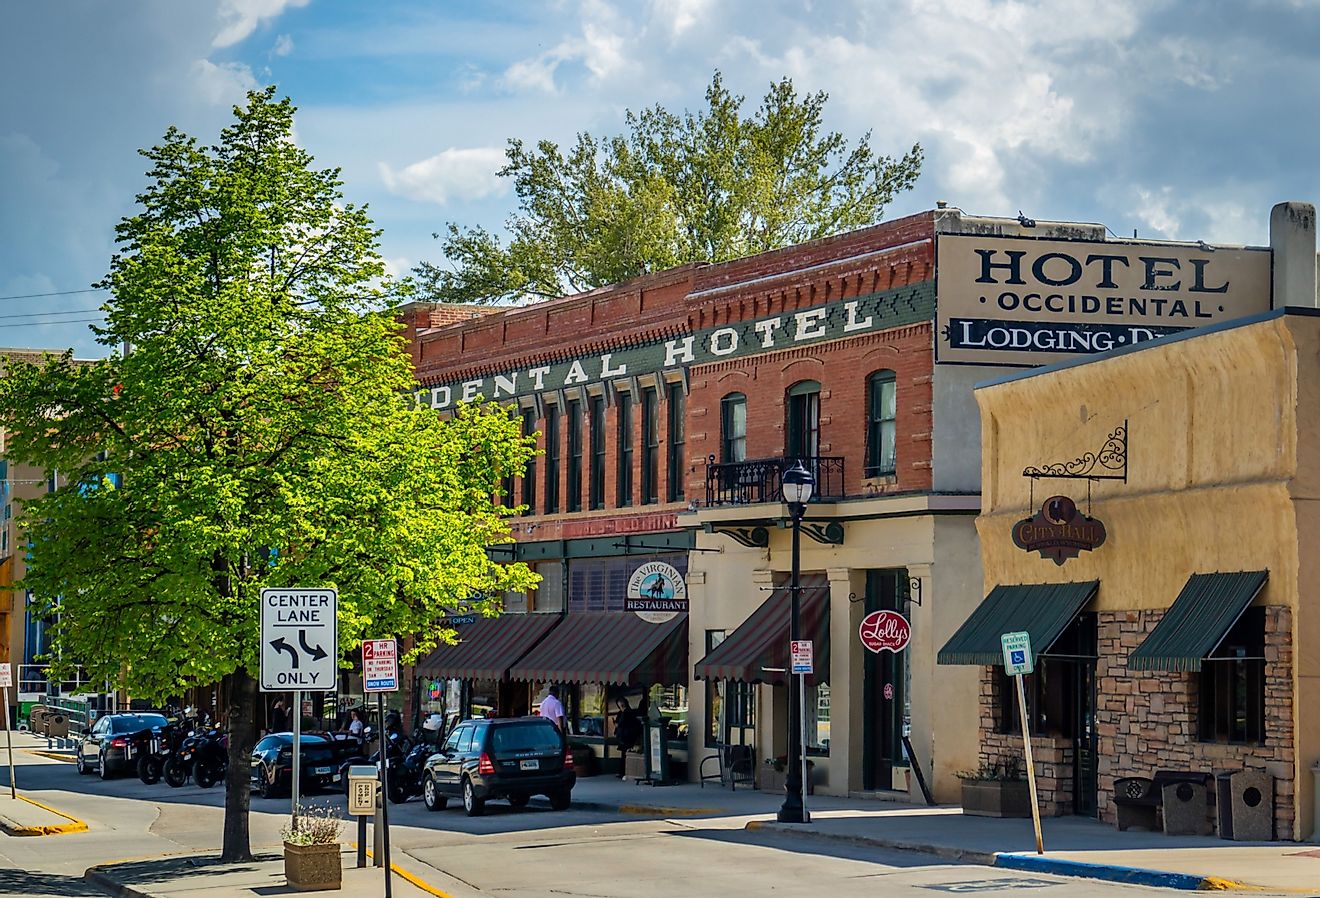 The Occidental Hotel Lodging and restaurants in the city of Buffalo, Wyoming. Image credit Cheri Alguire via Shutterstock.